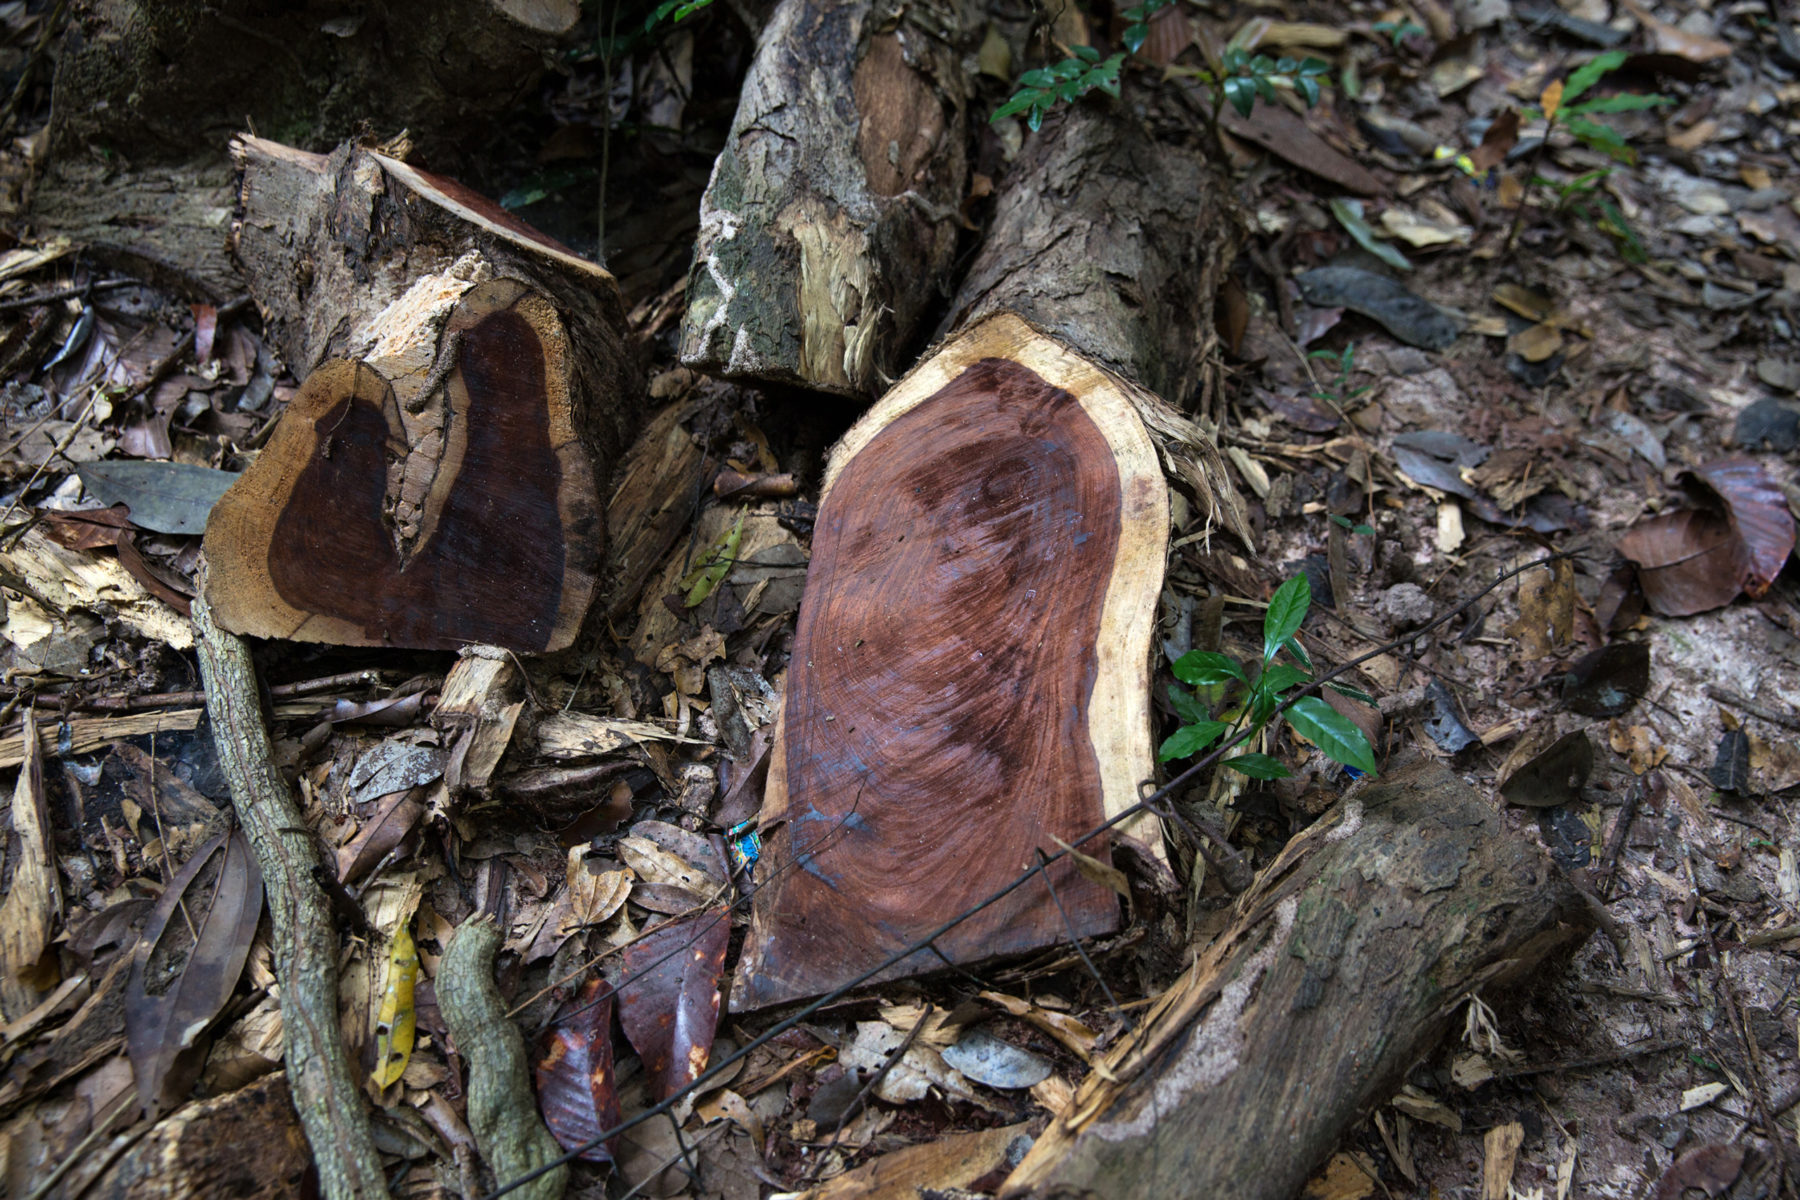 Branches of an illegally logged Siamese rosewood tree left behind by poachers in the Ta Phraya National Park (Image: Luke Duggleby)